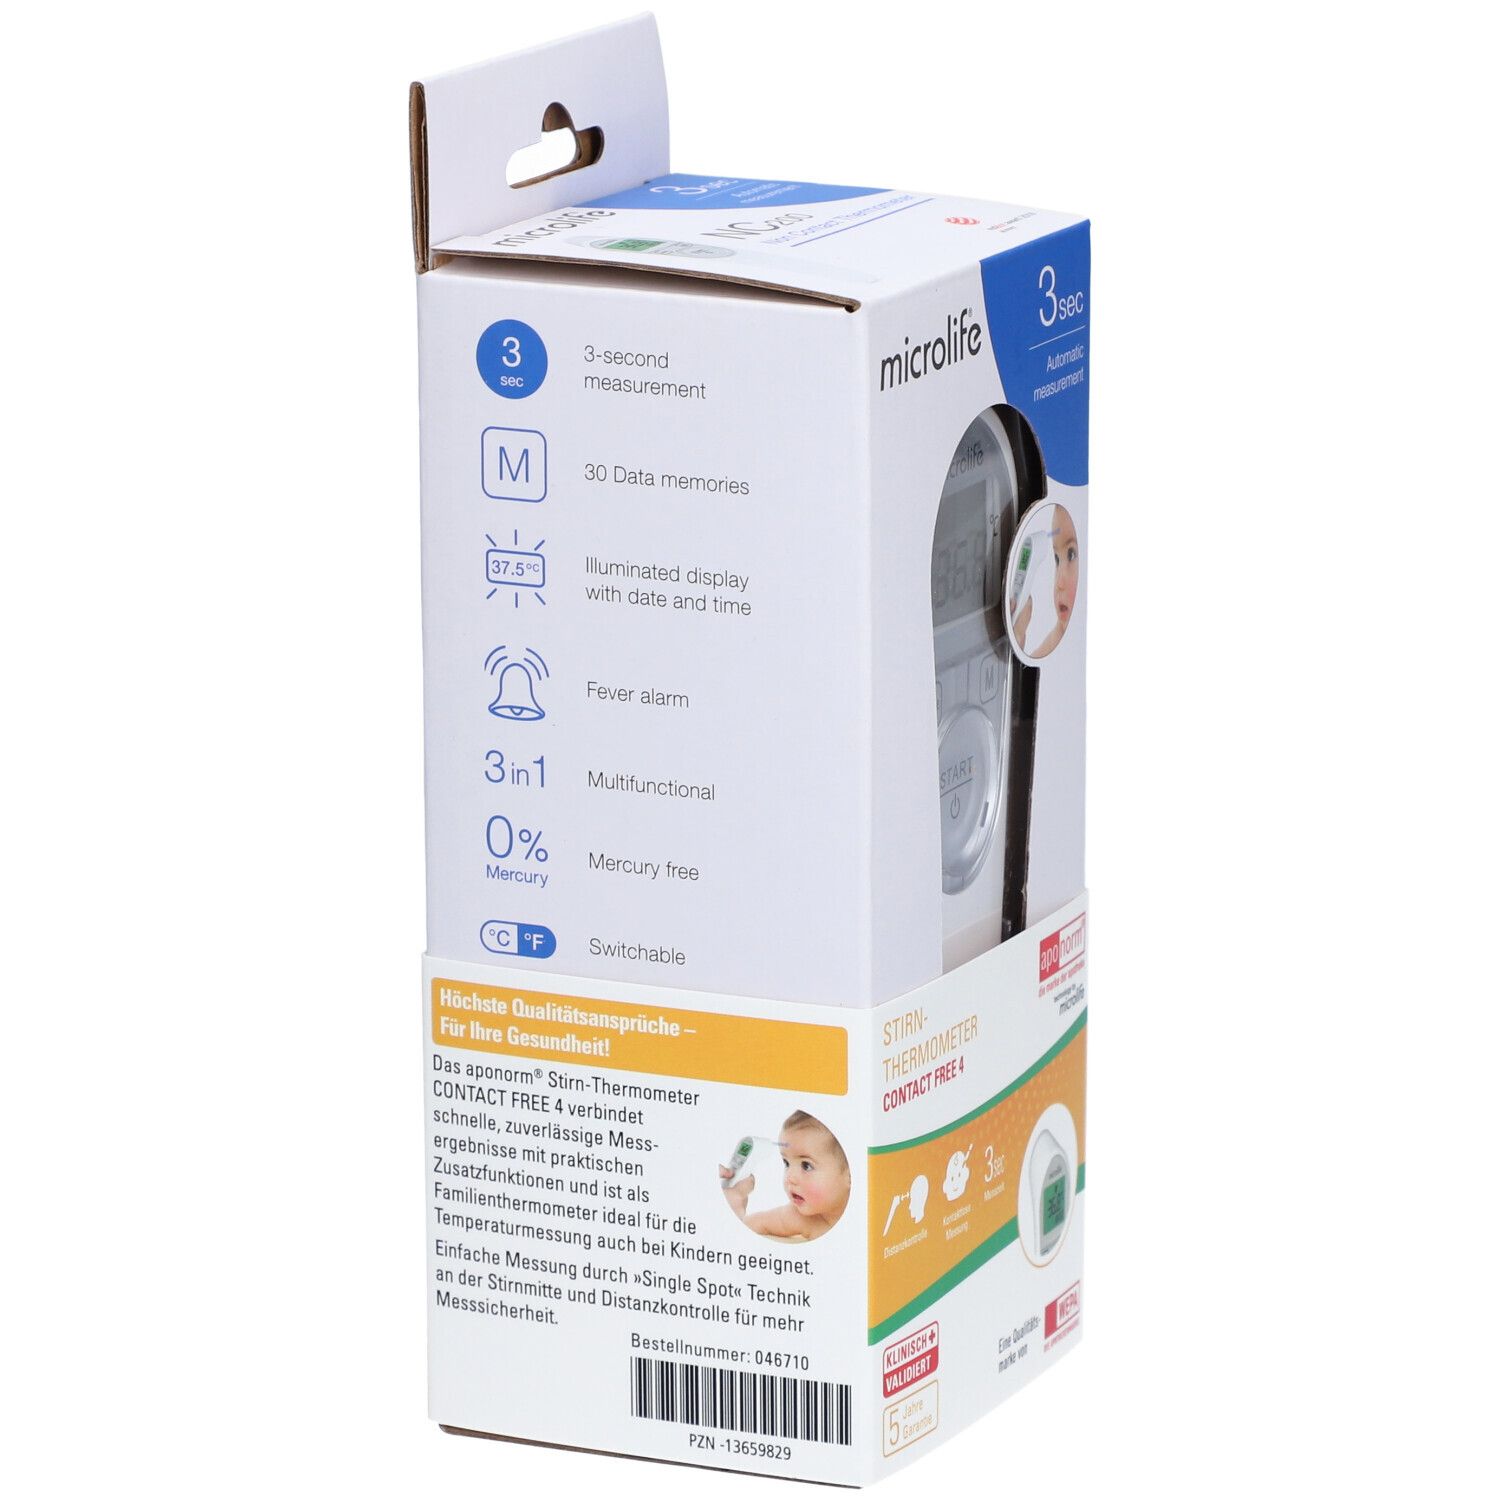 aponorm® Fieberthermometer Stirn Contact-Free 4